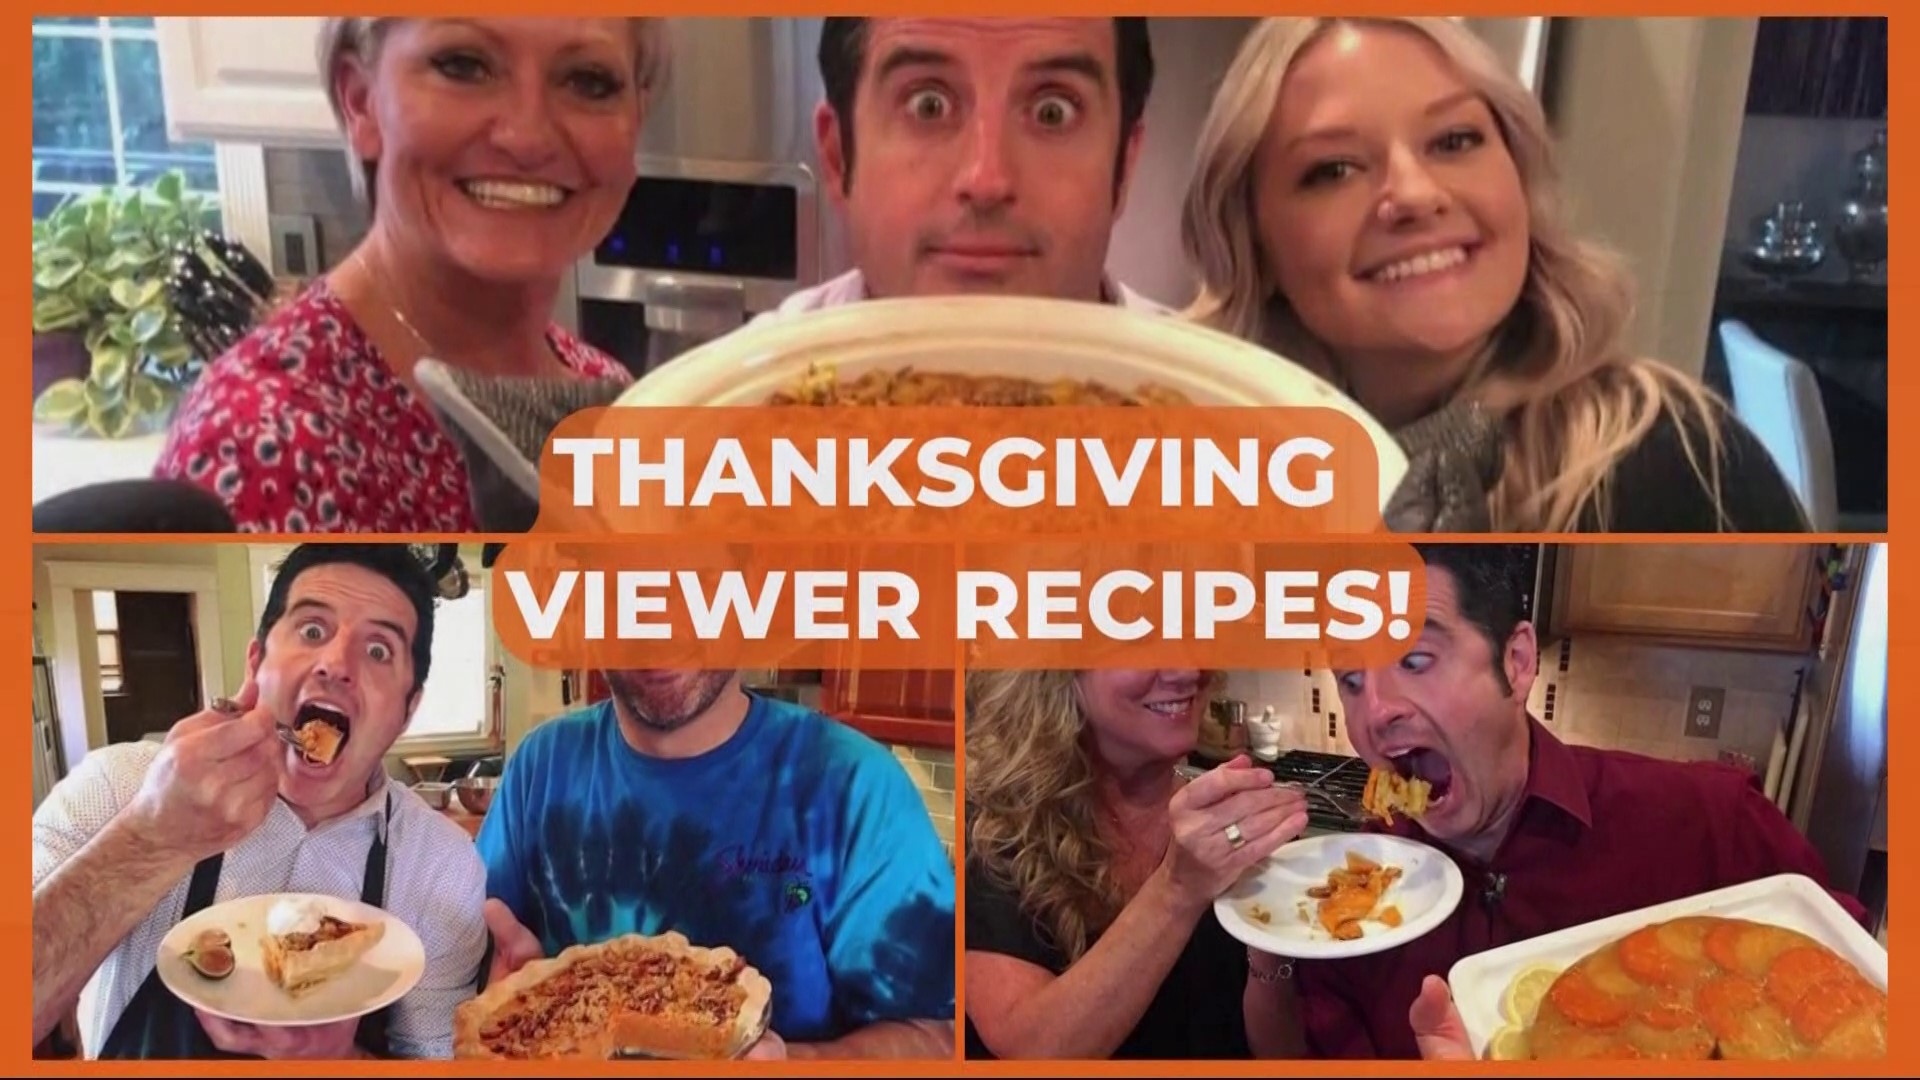 KGW Sunrise viewers share their favorite Thanksgiving viewer recipes with Drew Carney